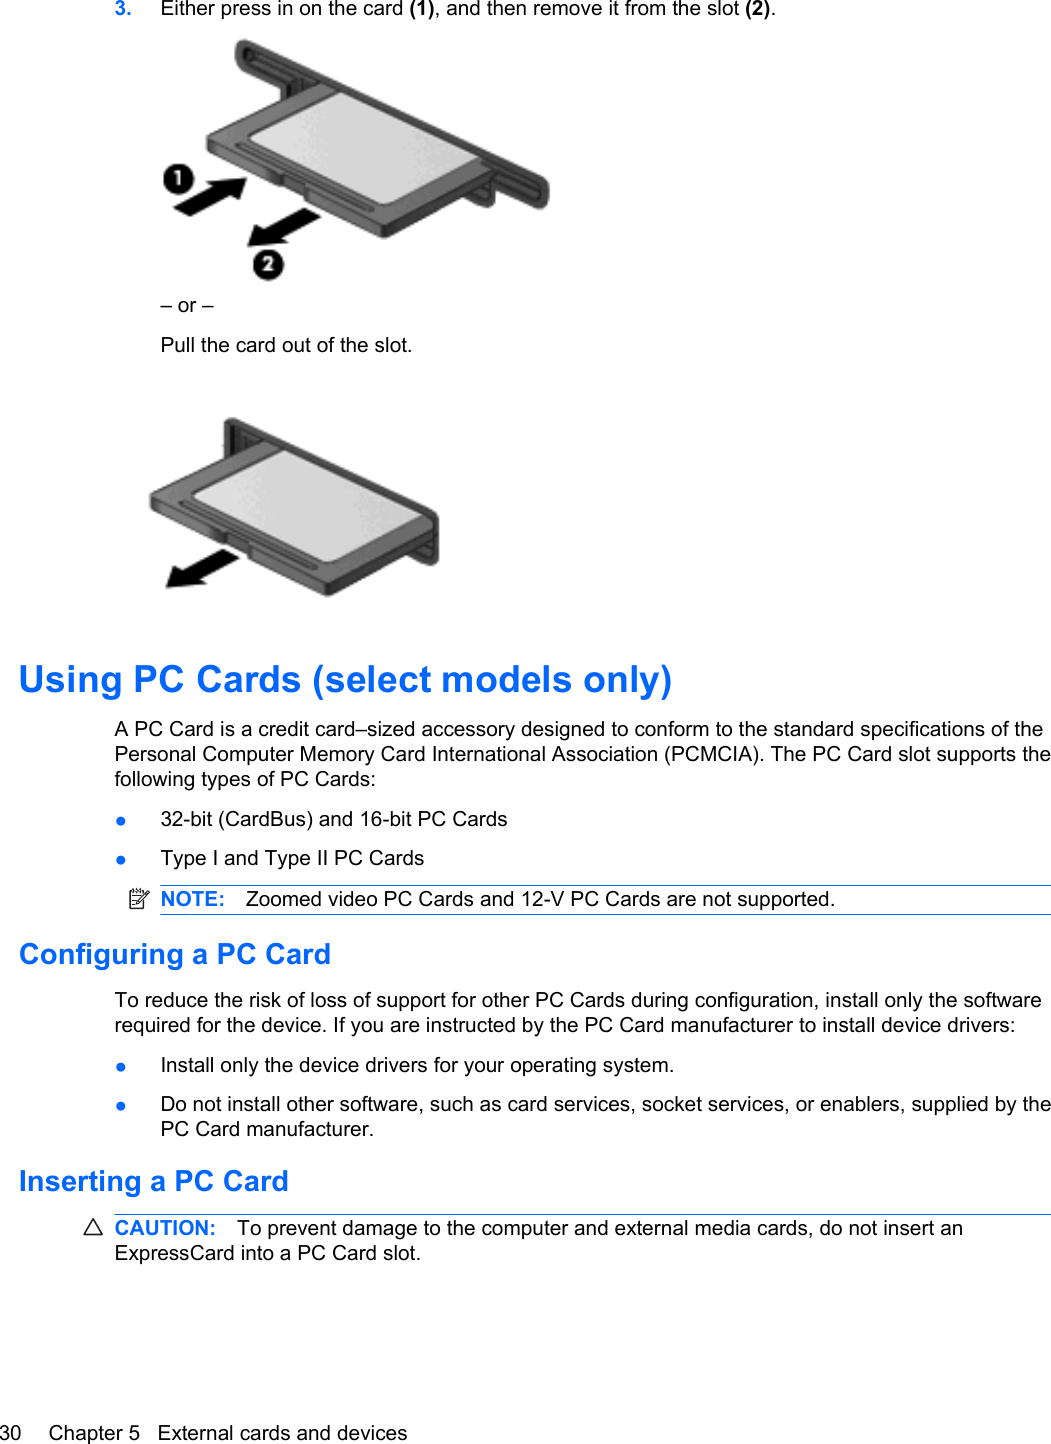 3. Either press in on the card (1), and then remove it from the slot (2).– or –Pull the card out of the slot.Using PC Cards (select models only)A PC Card is a credit card–sized accessory designed to conform to the standard specifications of thePersonal Computer Memory Card International Association (PCMCIA). The PC Card slot supports thefollowing types of PC Cards:●32-bit (CardBus) and 16-bit PC Cards●Type I and Type II PC CardsNOTE: Zoomed video PC Cards and 12-V PC Cards are not supported.Configuring a PC CardTo reduce the risk of loss of support for other PC Cards during configuration, install only the softwarerequired for the device. If you are instructed by the PC Card manufacturer to install device drivers:●Install only the device drivers for your operating system.●Do not install other software, such as card services, socket services, or enablers, supplied by thePC Card manufacturer.Inserting a PC CardCAUTION: To prevent damage to the computer and external media cards, do not insert anExpressCard into a PC Card slot.30 Chapter 5   External cards and devices